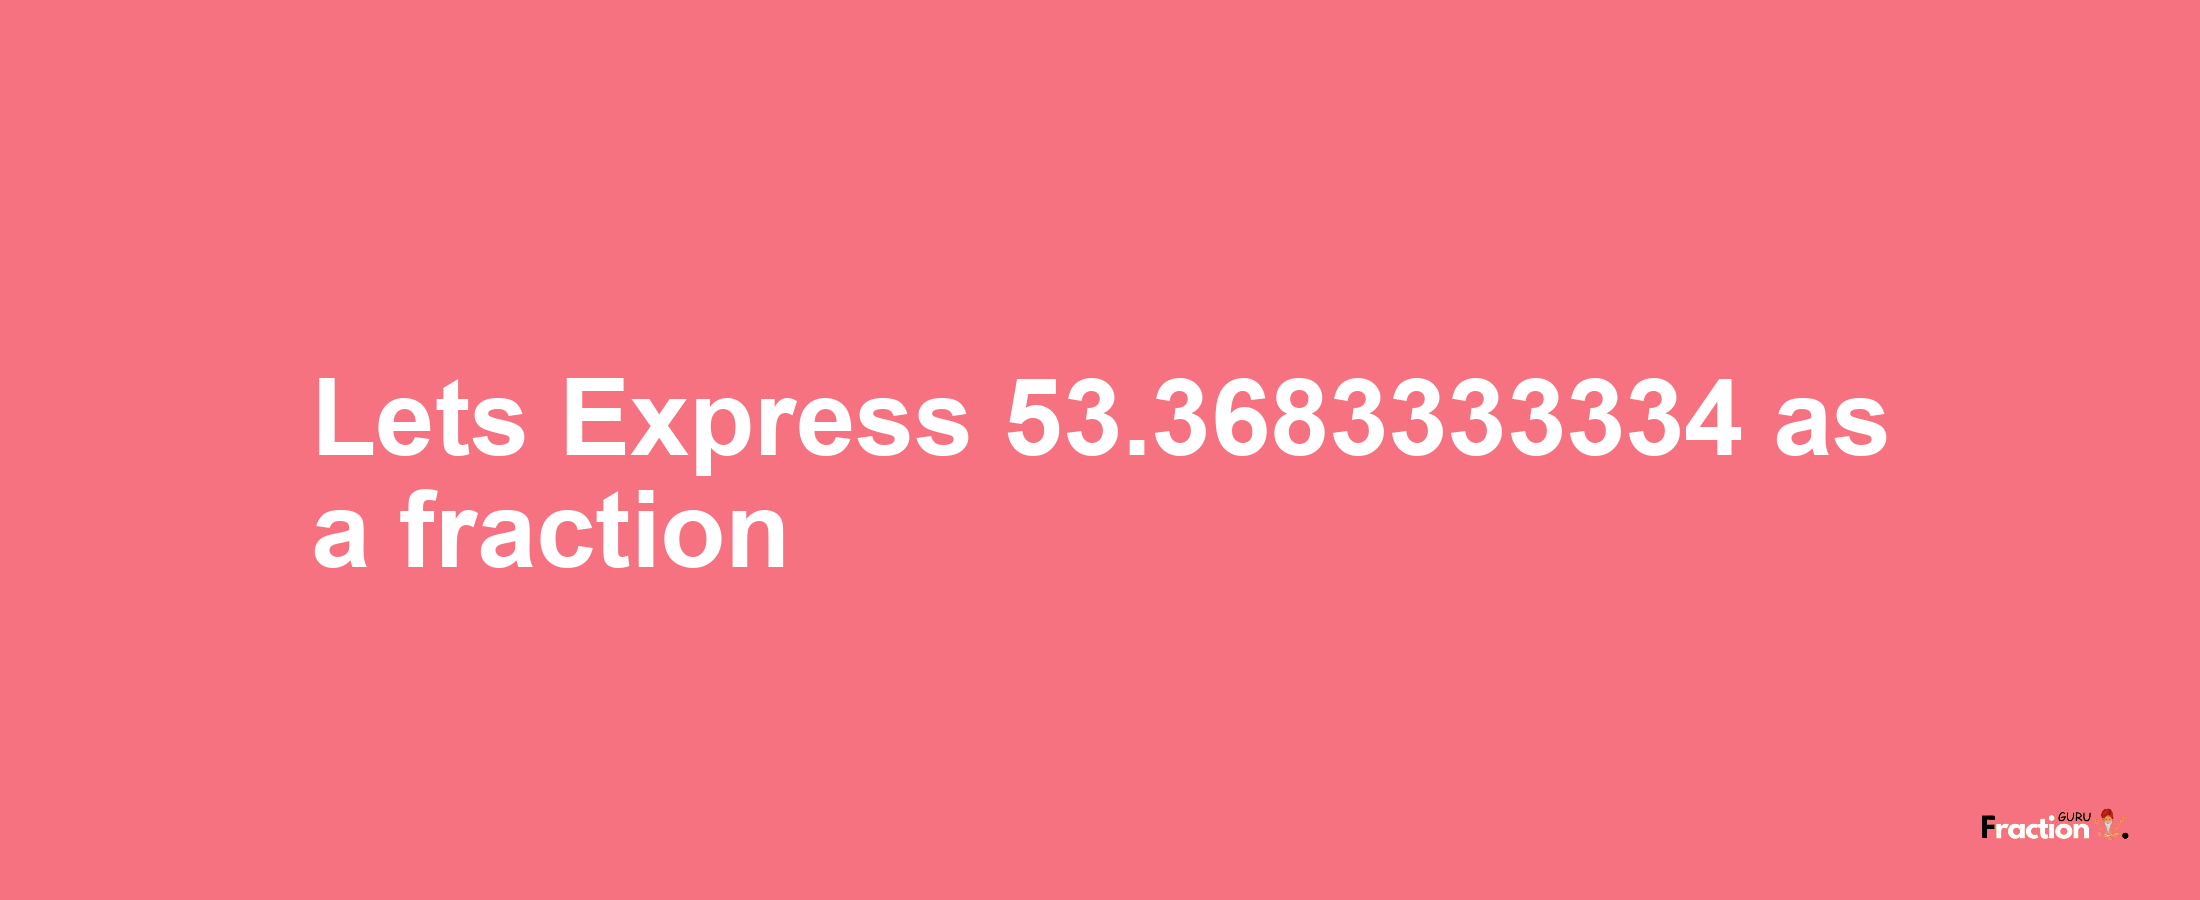 Lets Express 53.3683333334 as afraction